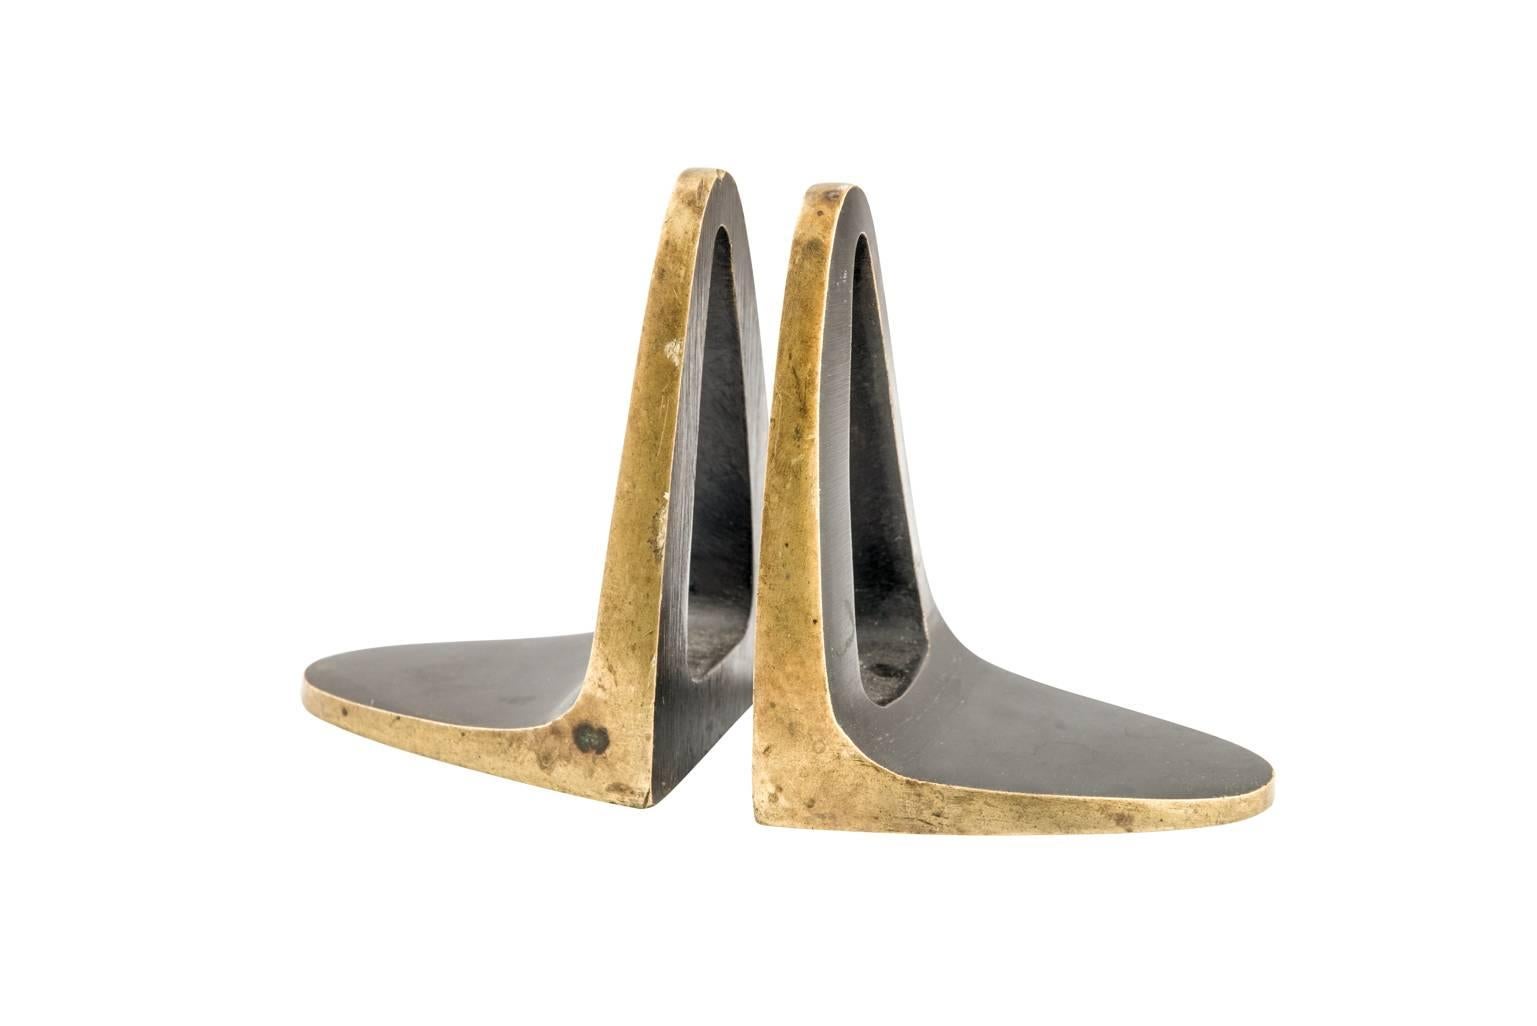 In the late 1920s the Werkstatte Hagenauer increased their range of objects gradually by niche products. The Werstatte Hagenauer aimed to provide all sorts of everyday life goods as possible. These two bookends were made around 1928 and are a good